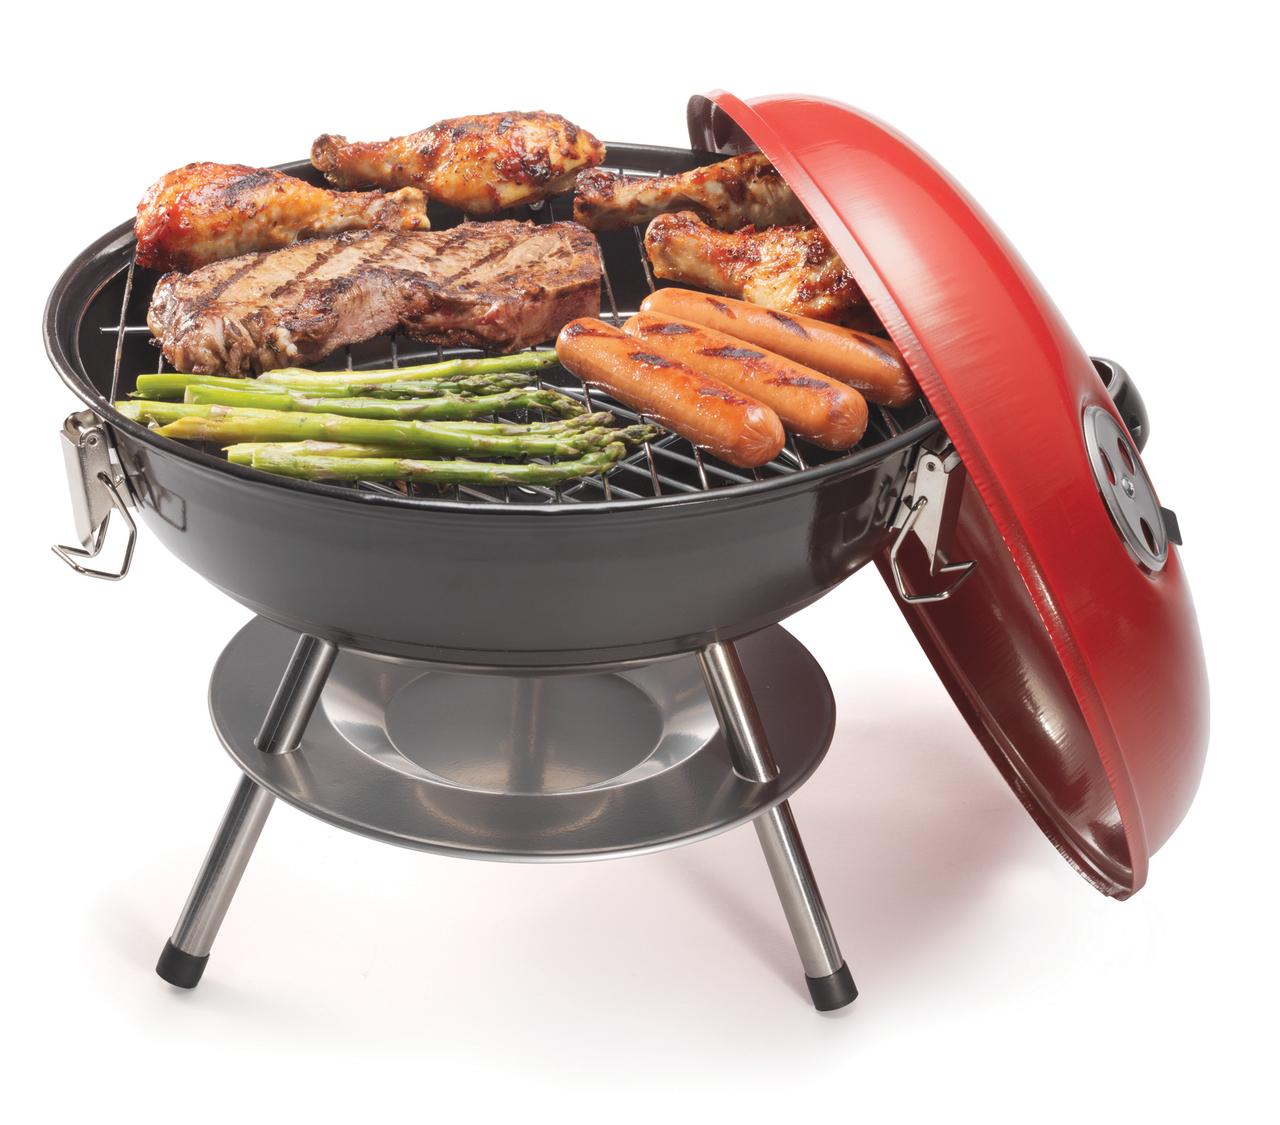 Cuisinart 14" Portable Charcoal Grill - image 2 of 3